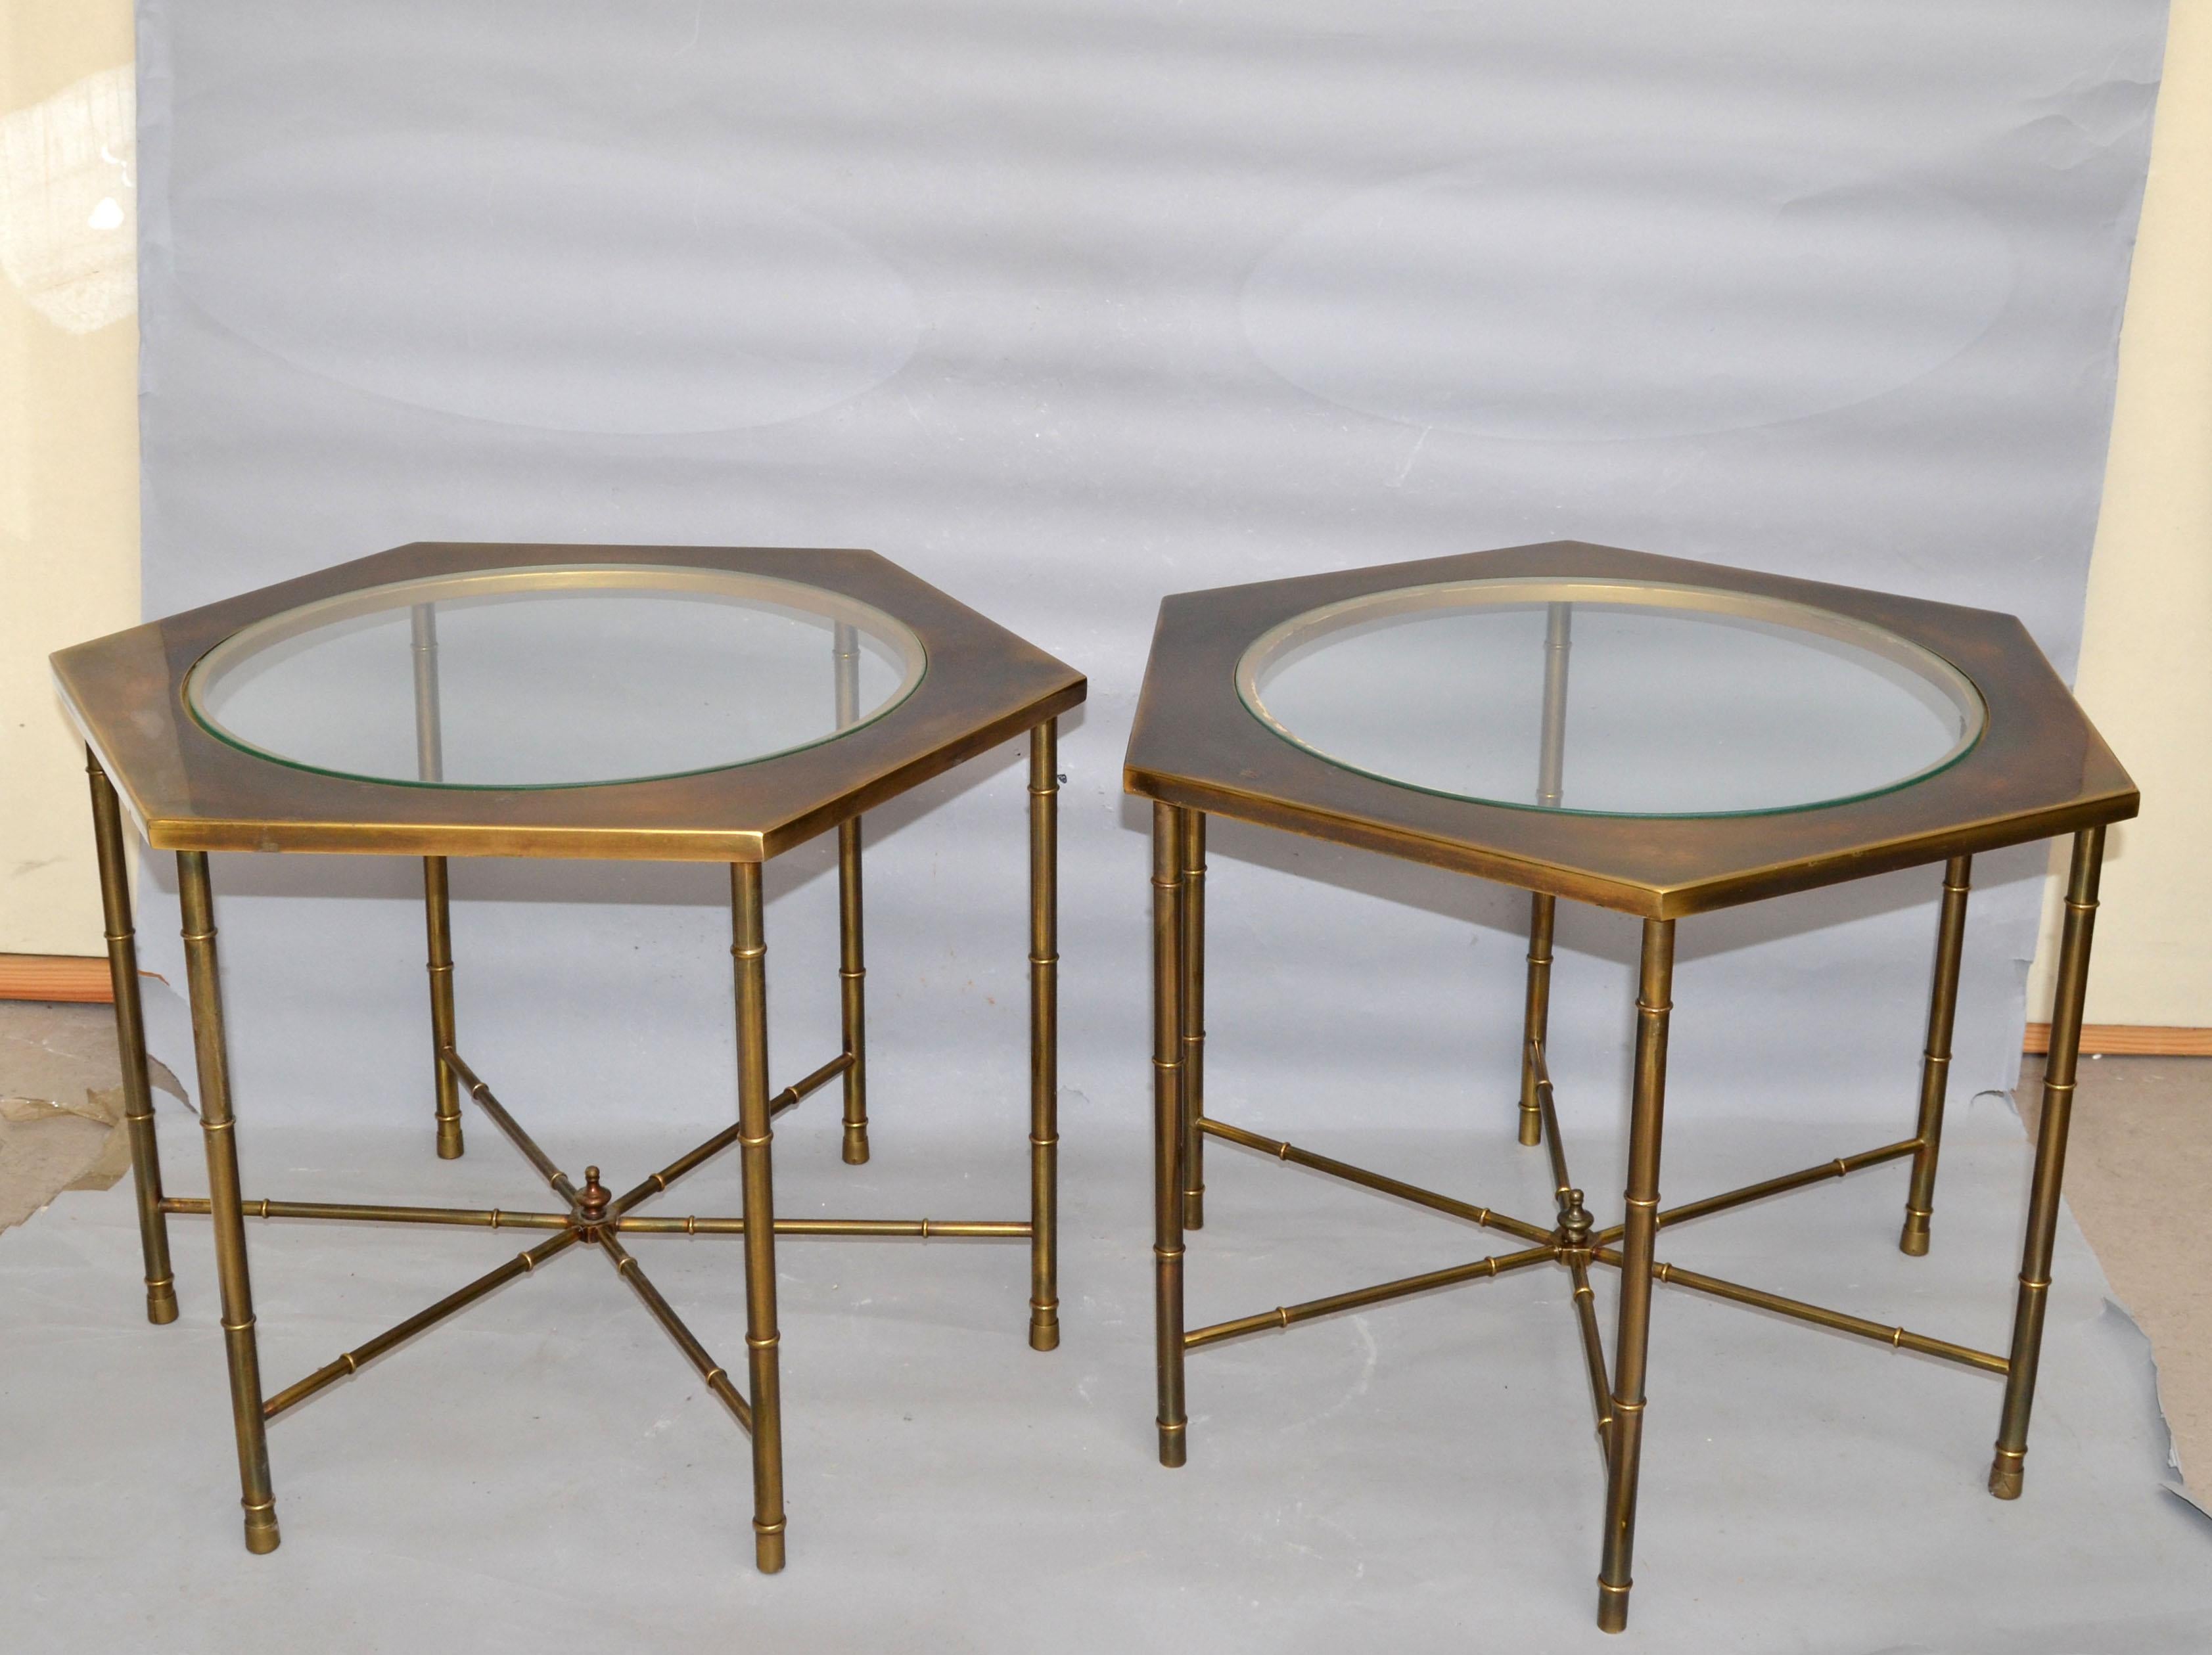 Mid-Century Modern Mastercraft Solid Brass Faux Bamboo & Glass Hexagonal Drink Cocktail Table, Pair